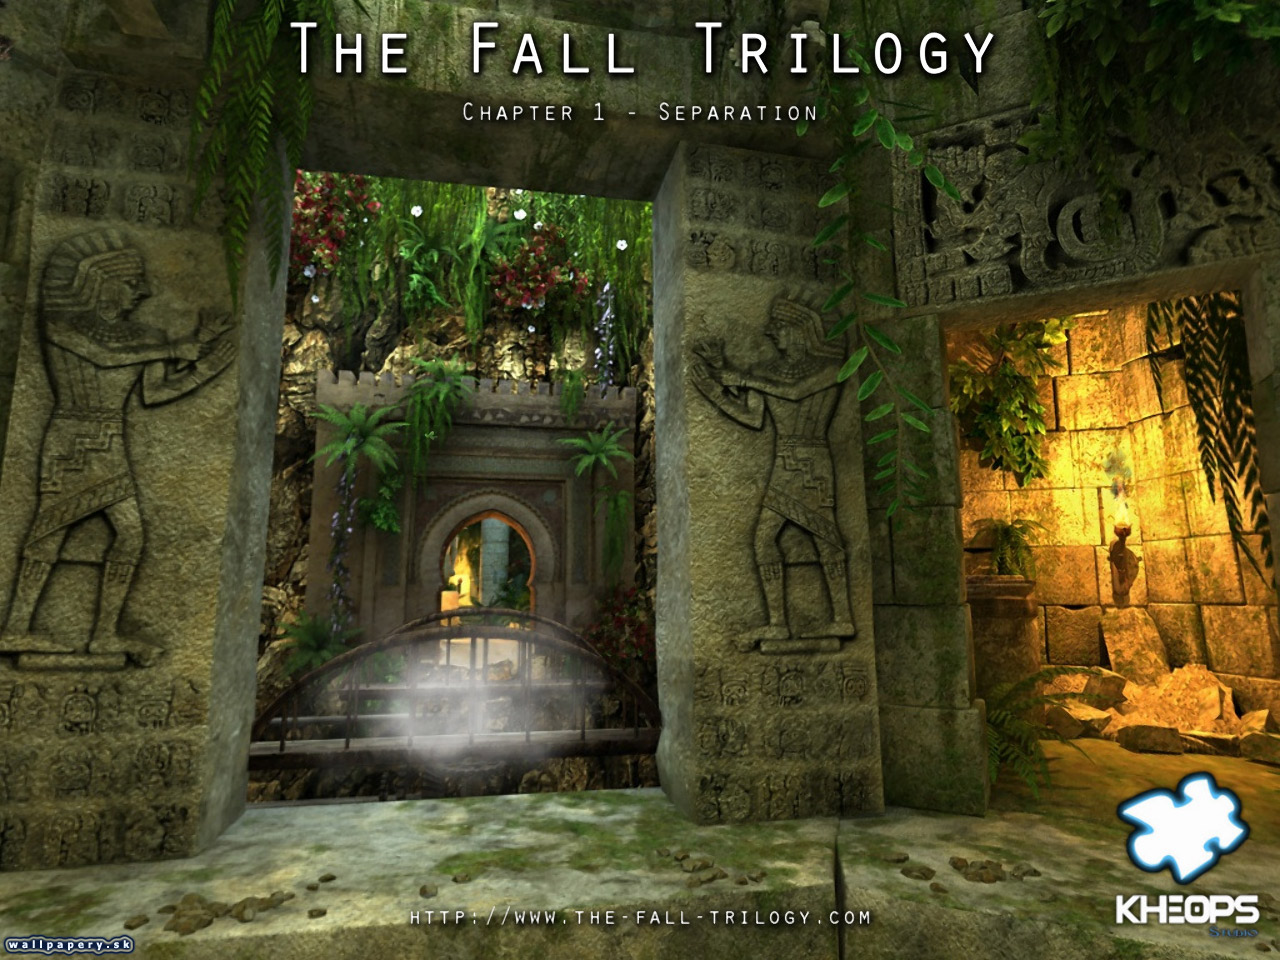 The Fall Trilogy - Chapter 1: Separation - wallpaper 6